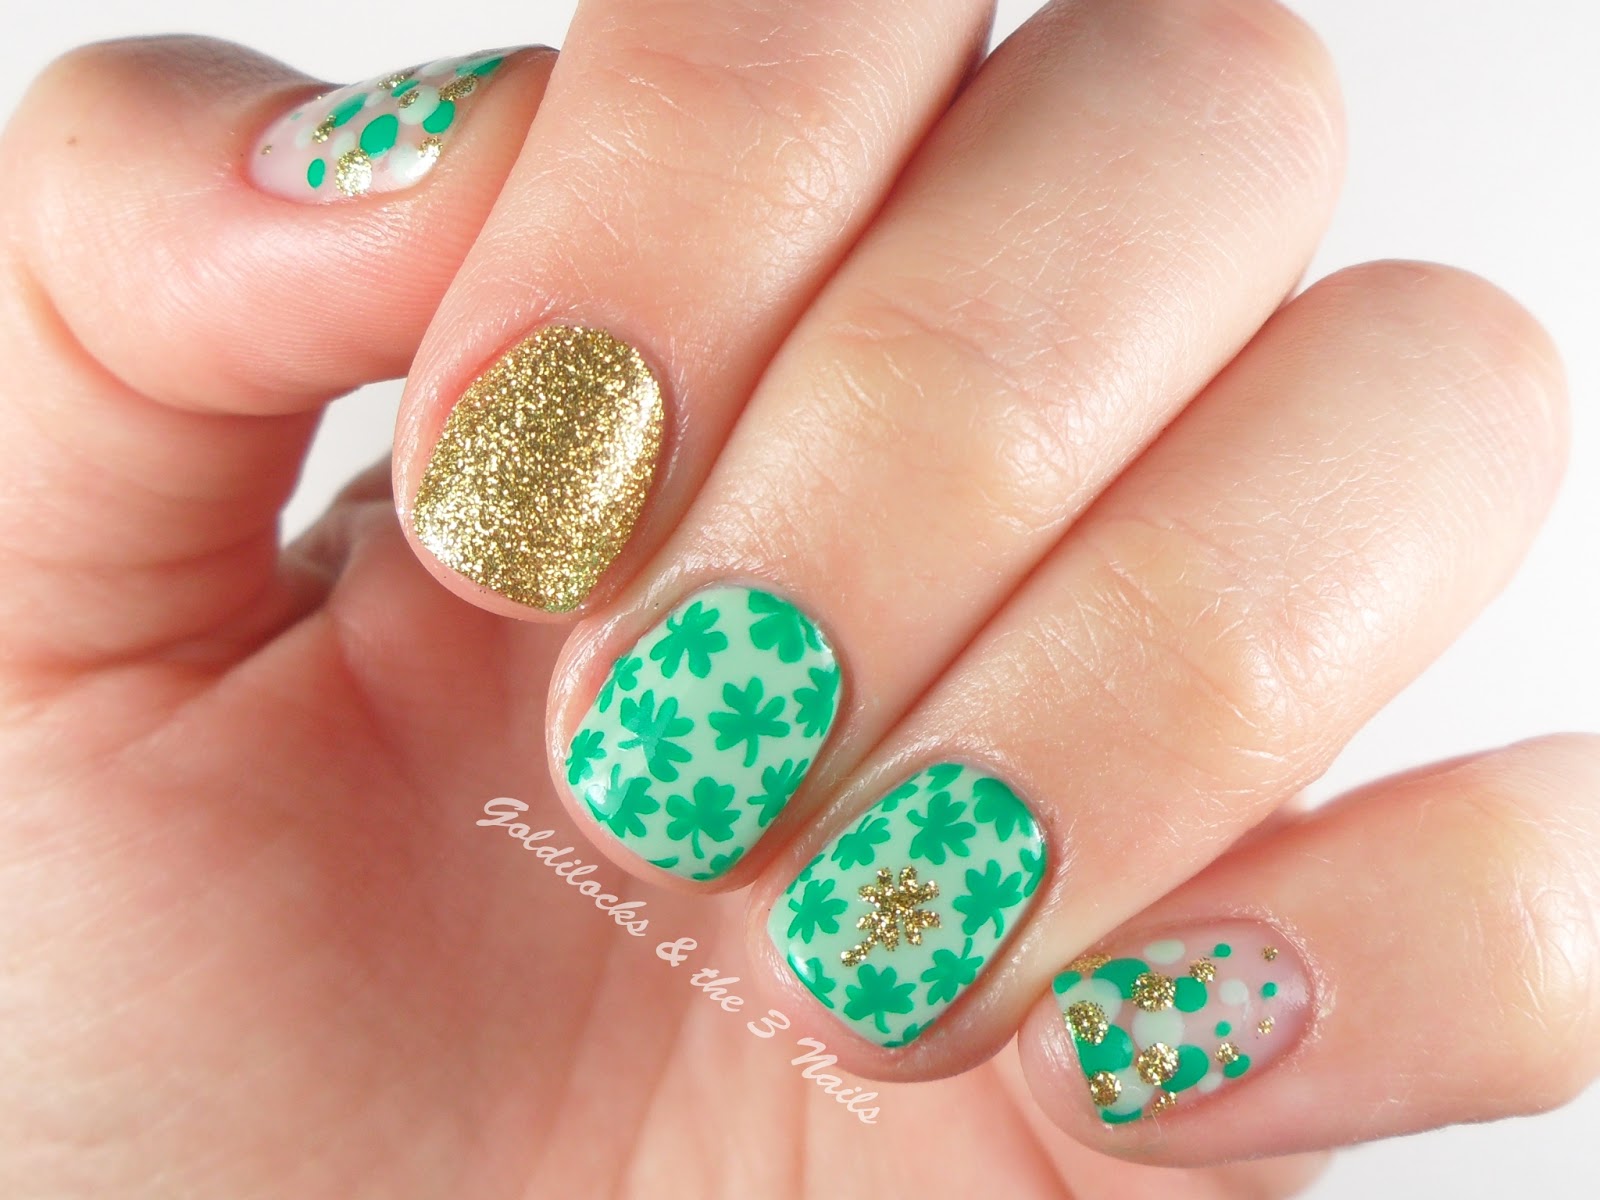 Rainbow Nail Designs for St. Patrick's Day - wide 2